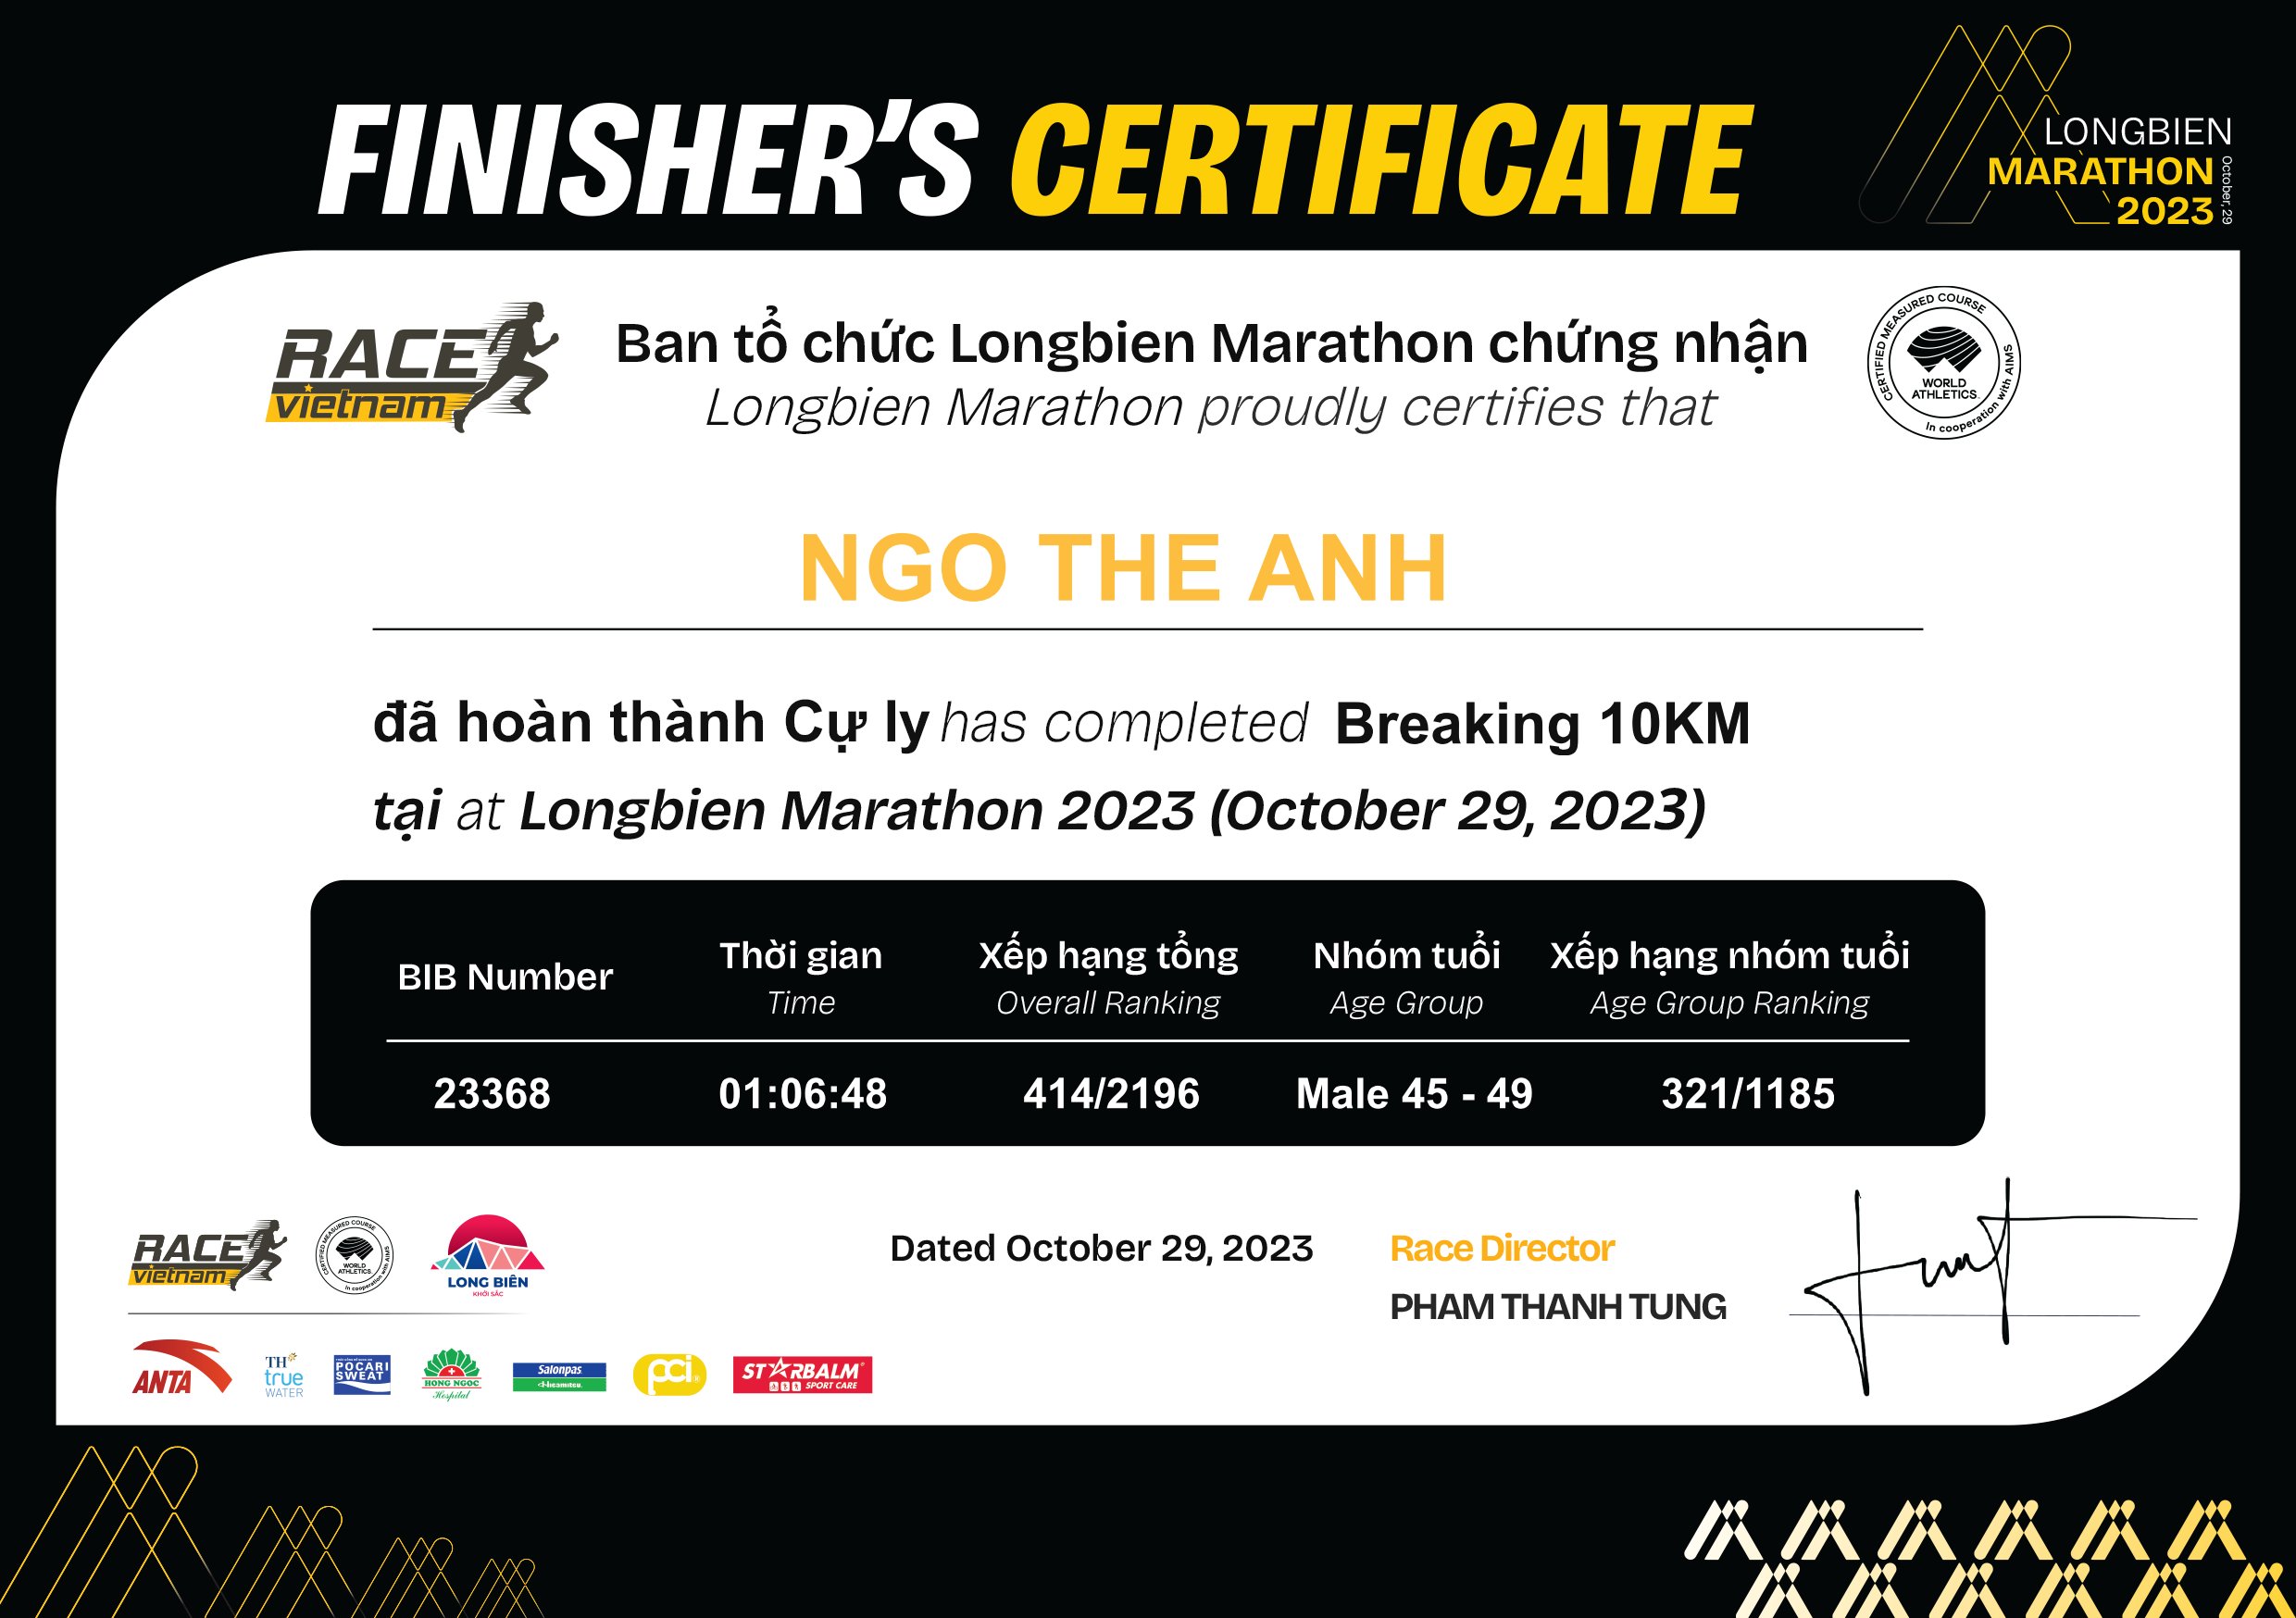 23368 - Ngo The Anh